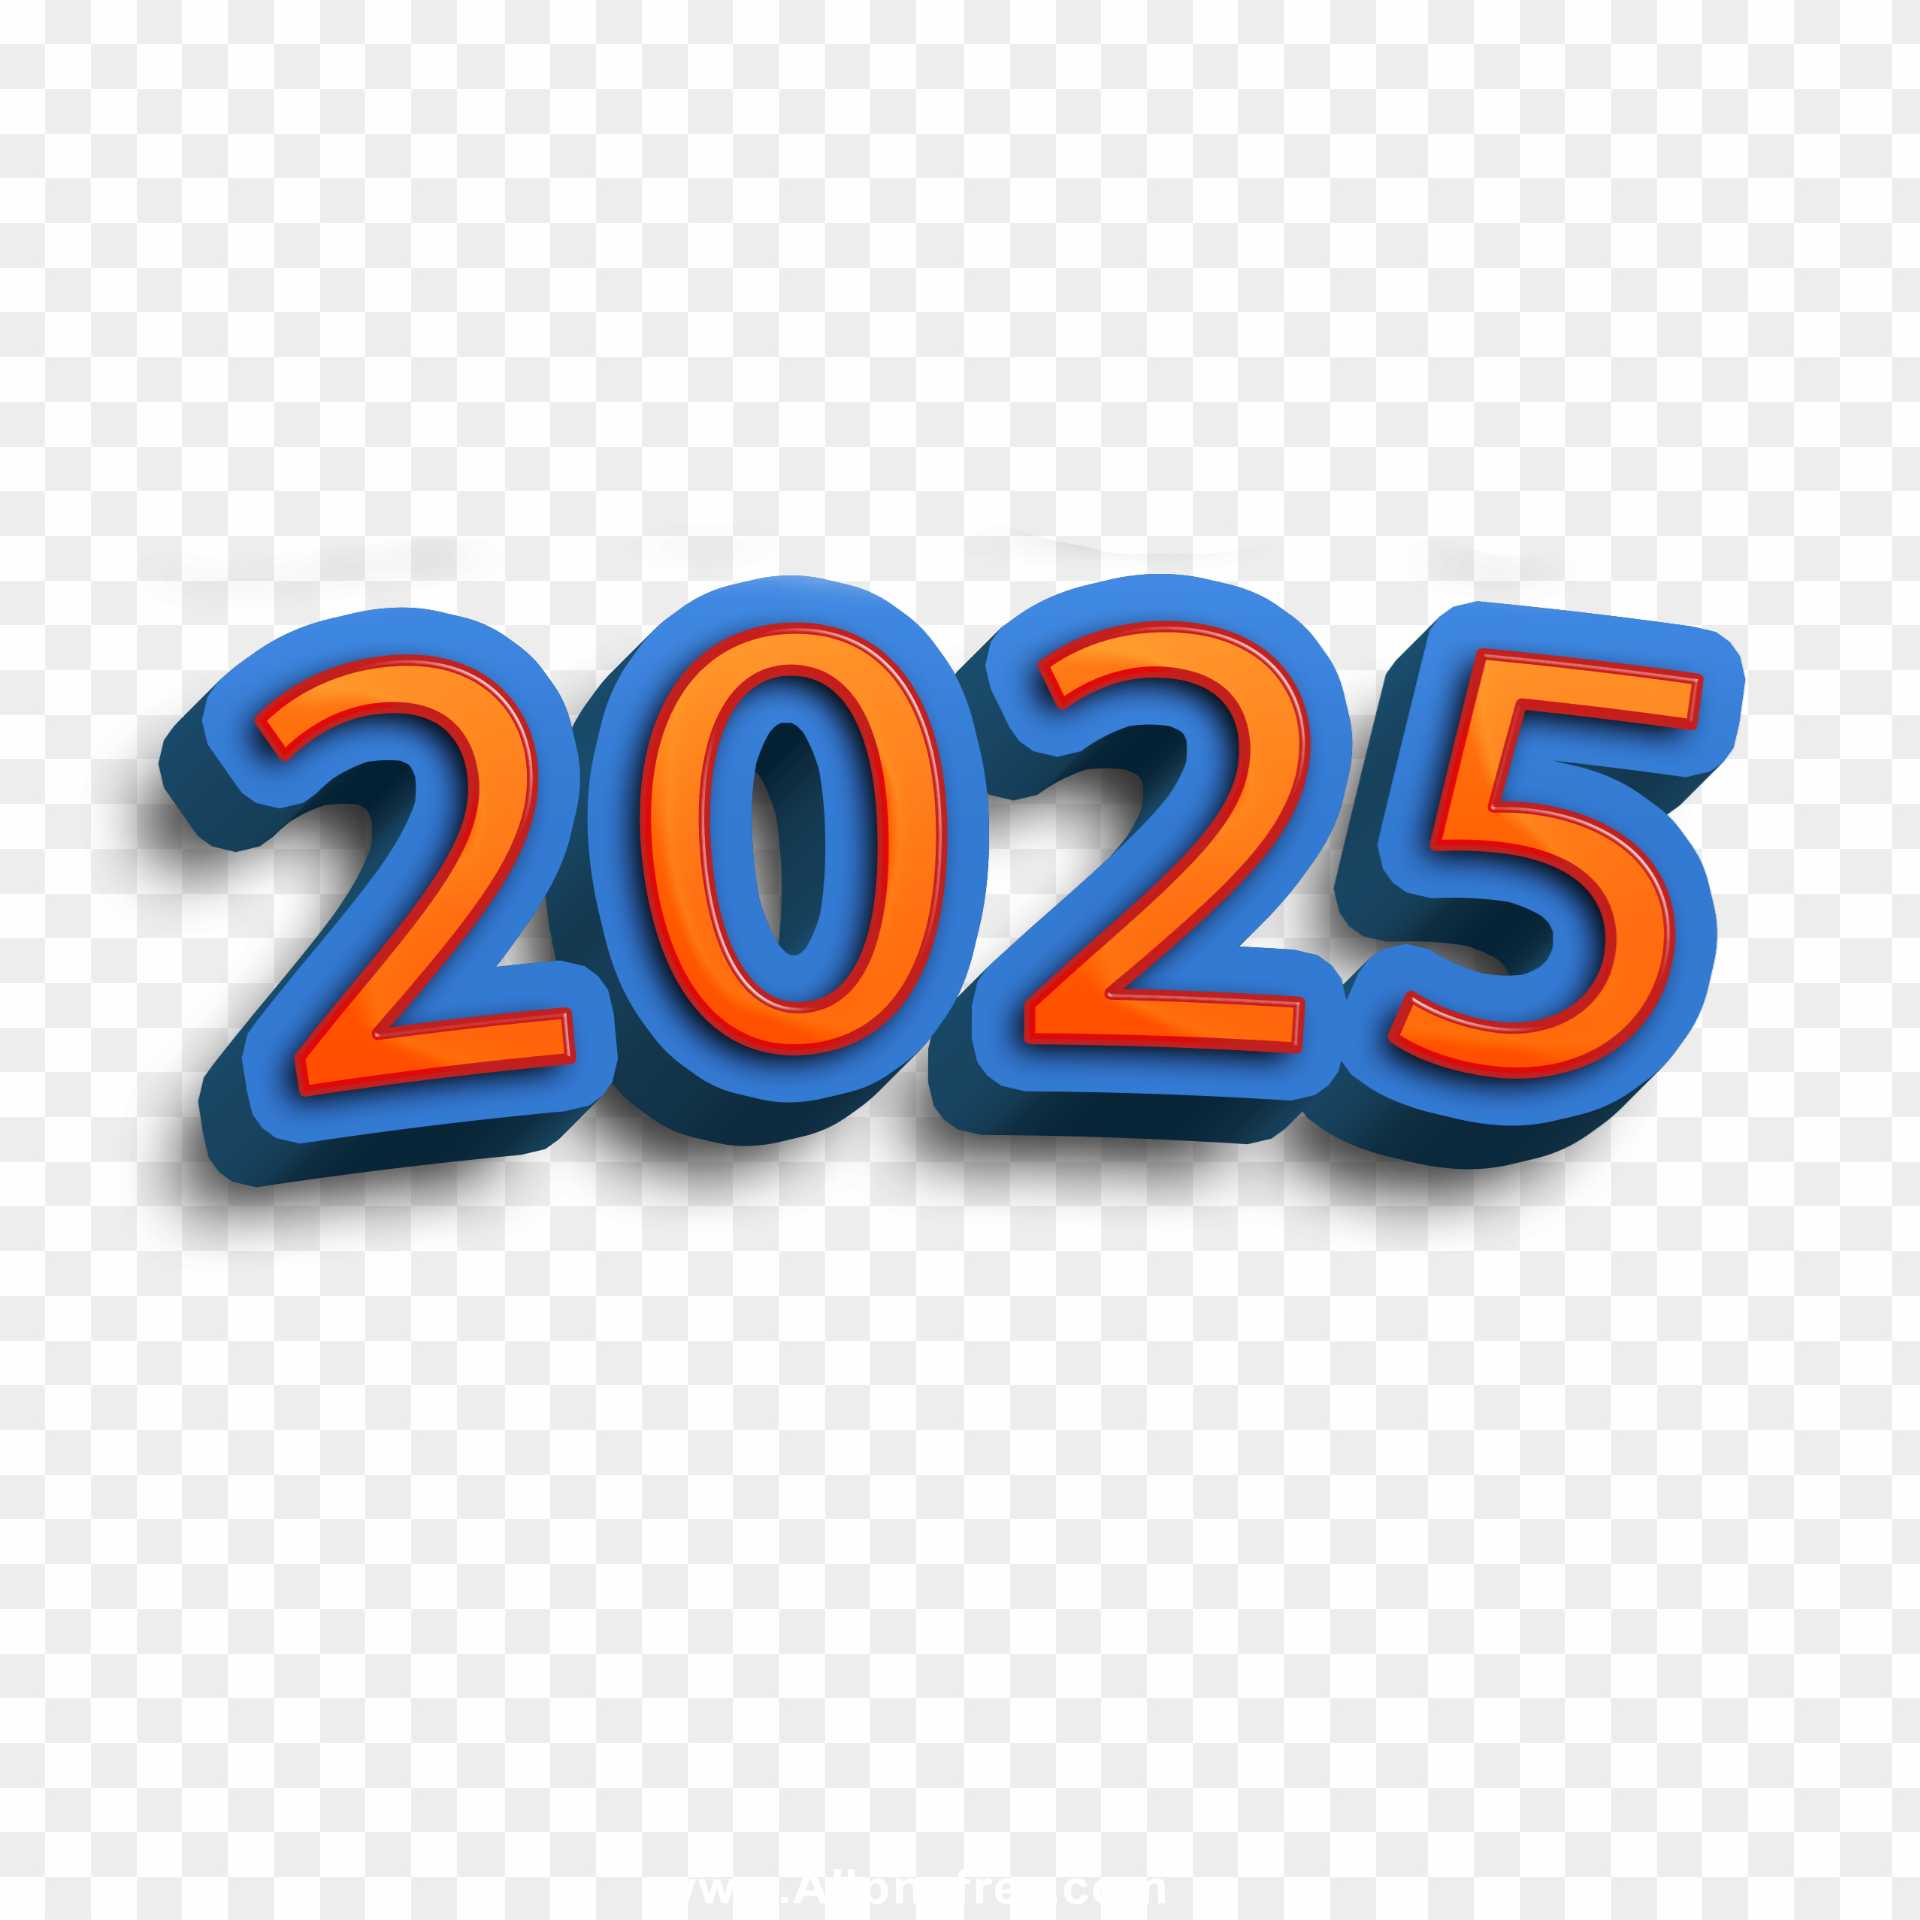 2025 number text PNG images download 